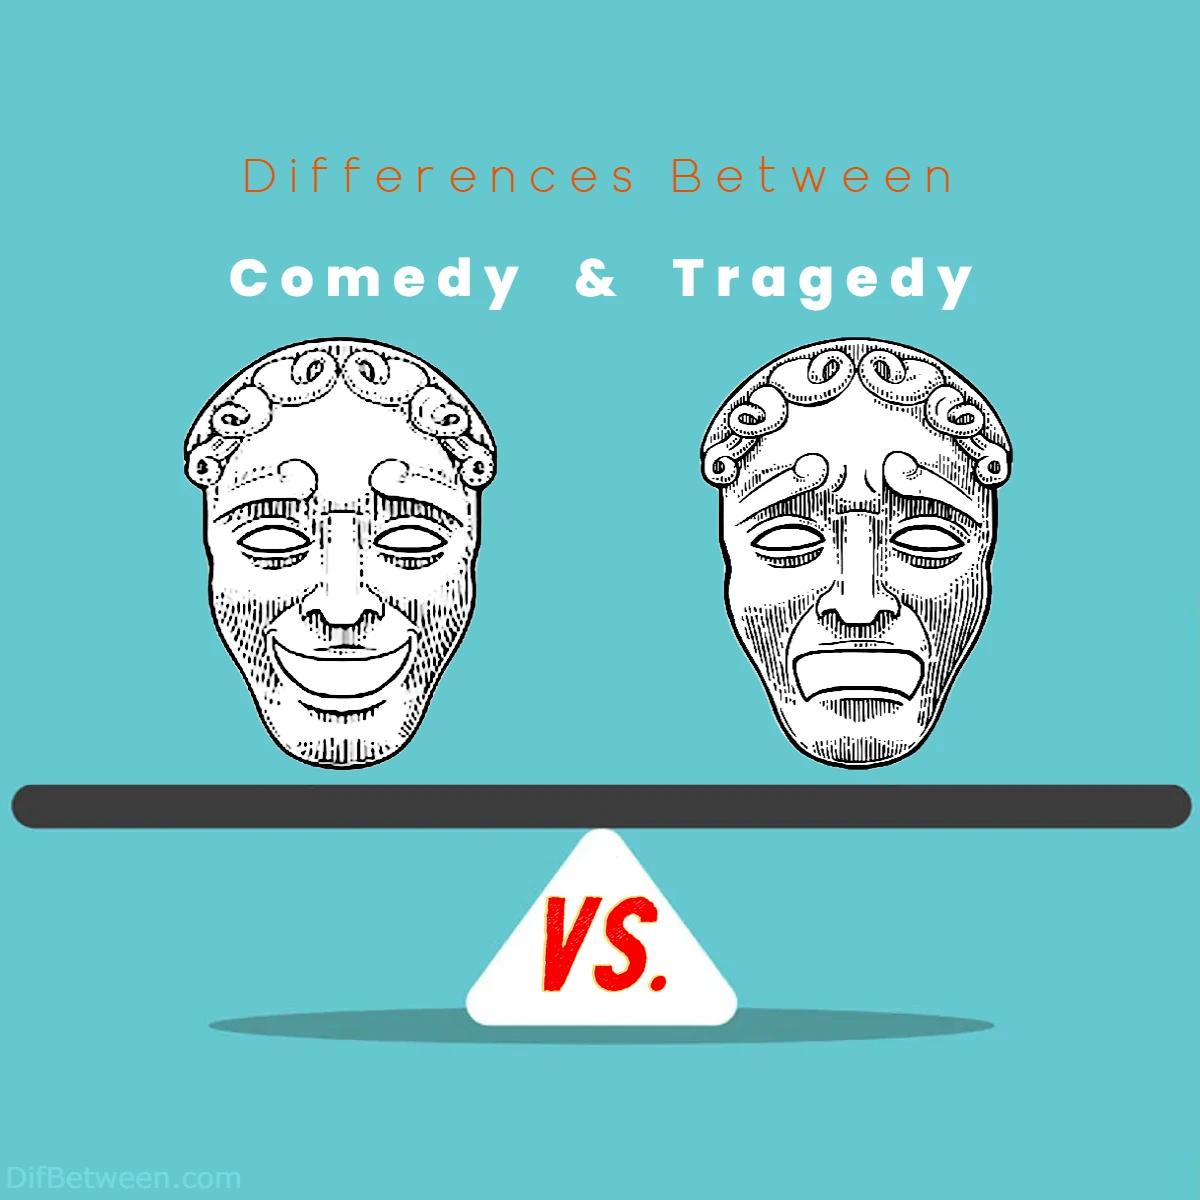 Differences Between Comedy vs Tragedy